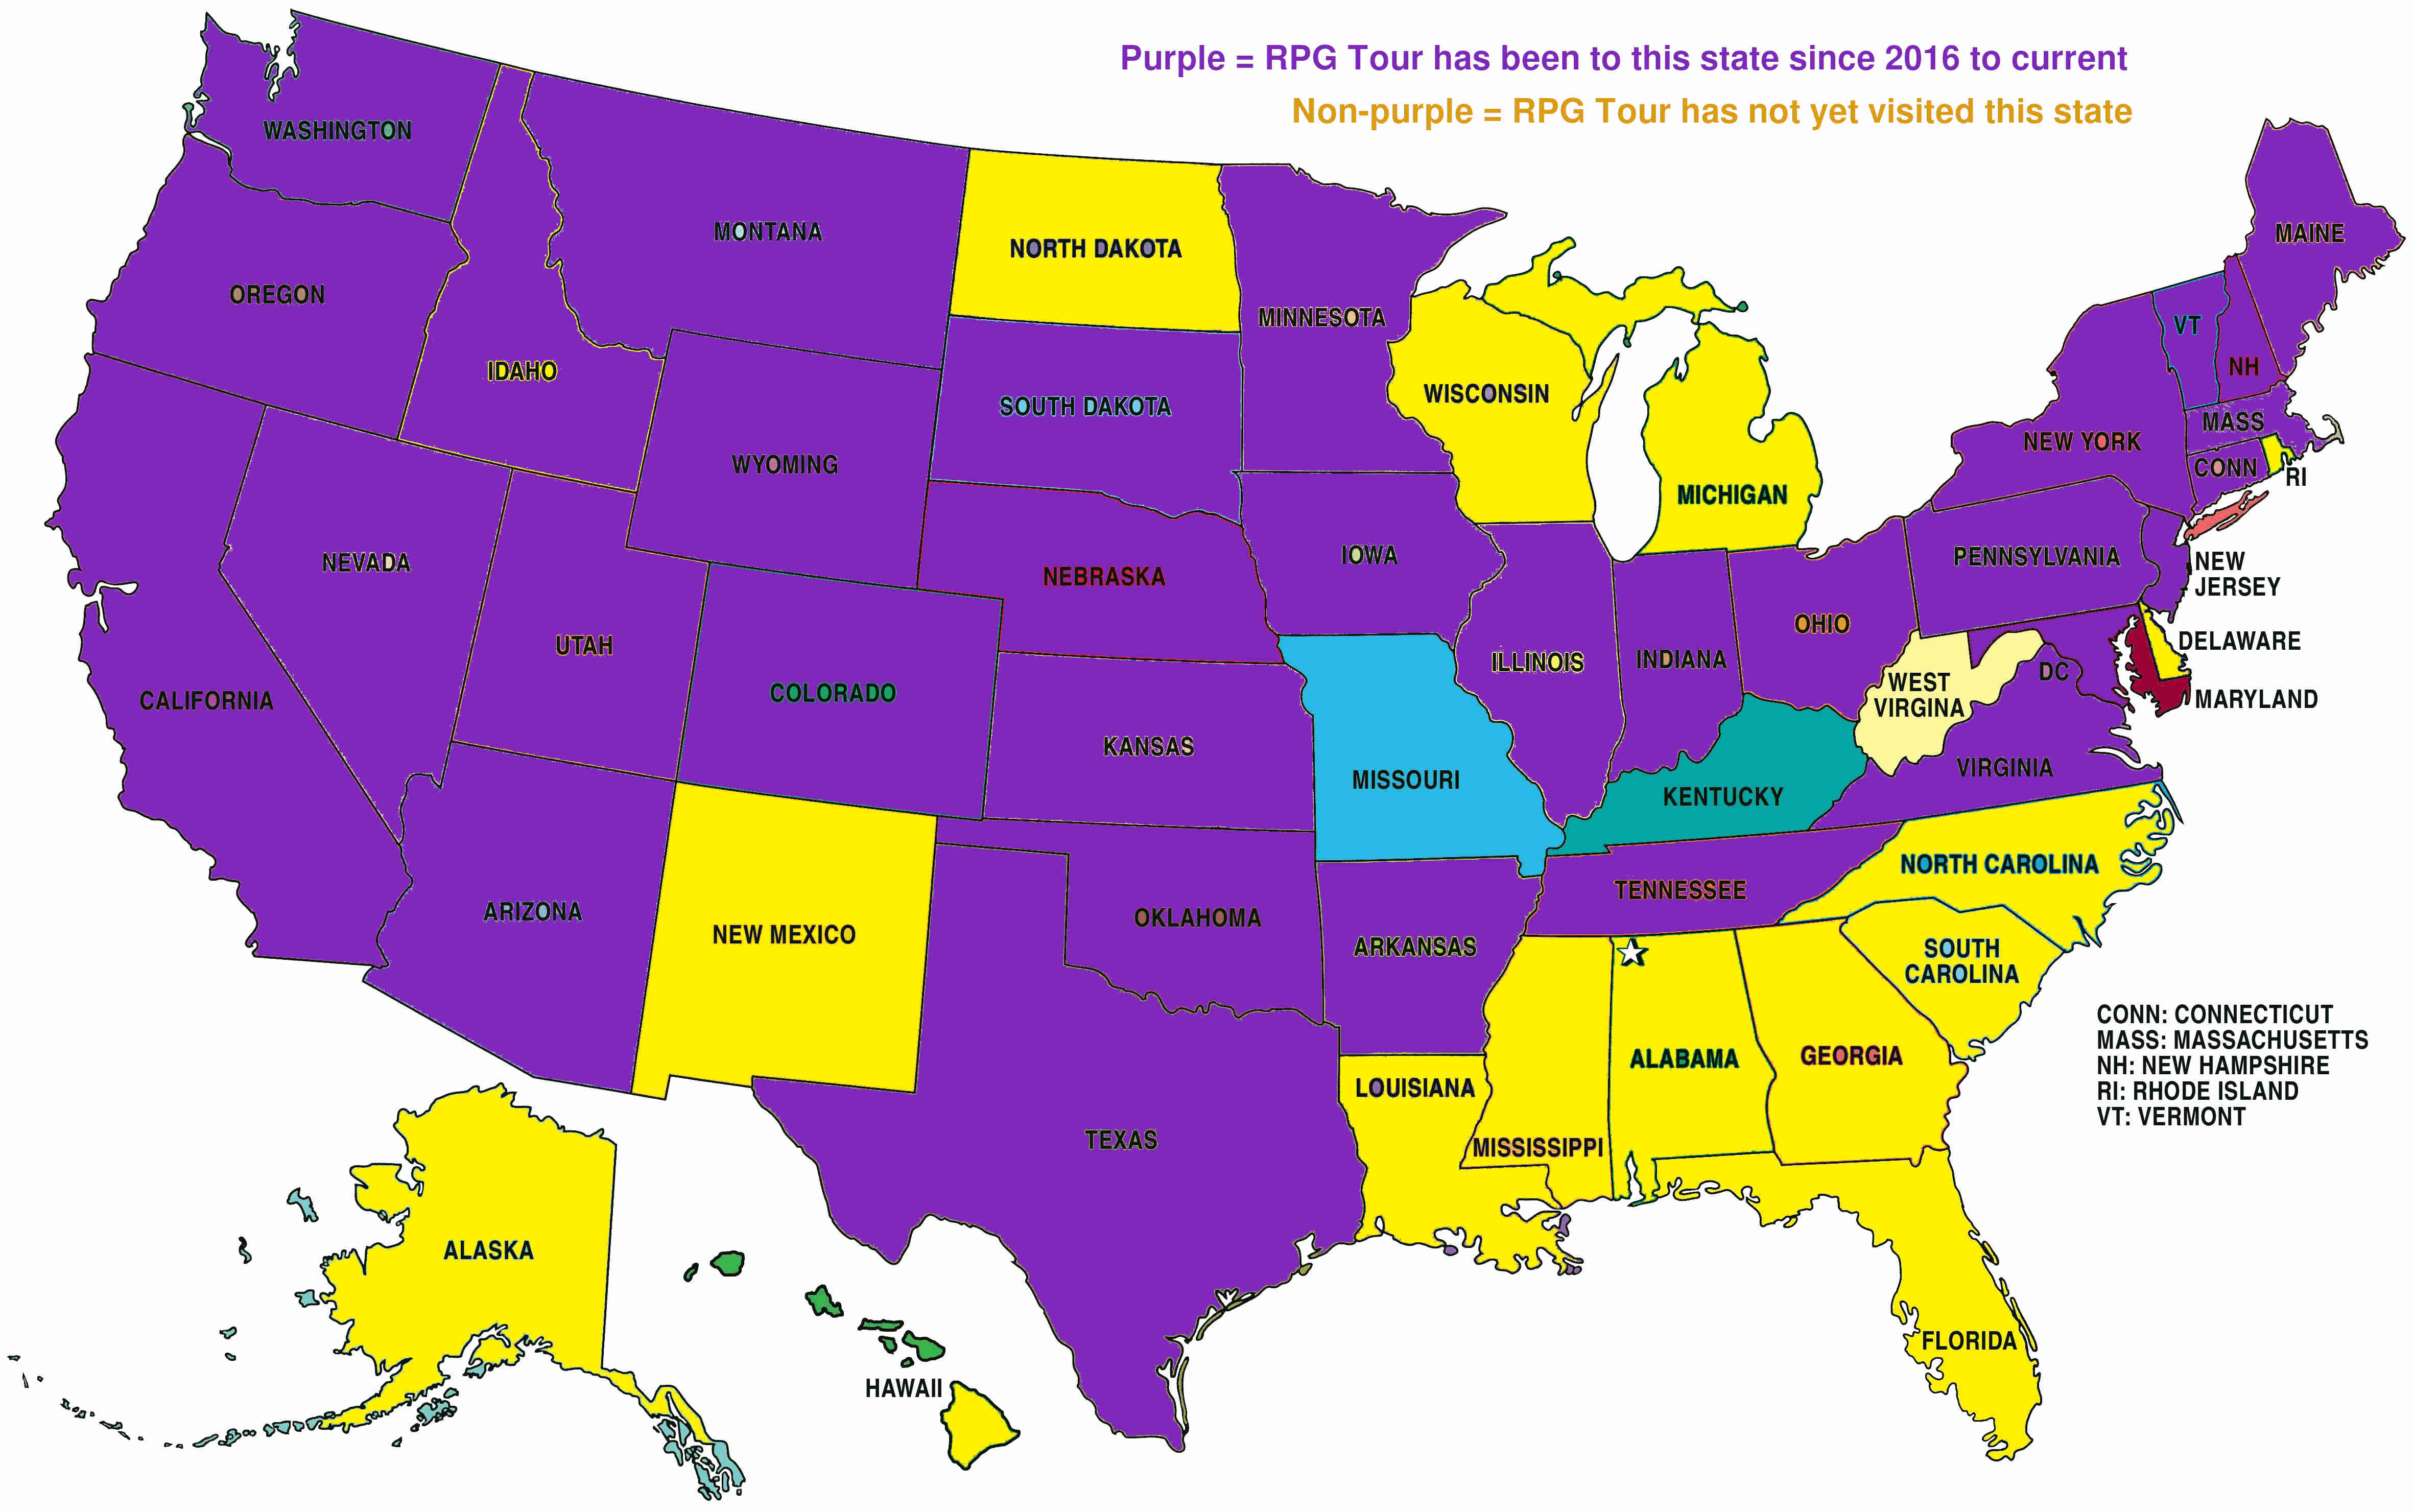 rpgtour-usa-map-states-visited-as-of-20200730a1-20pct.jpg